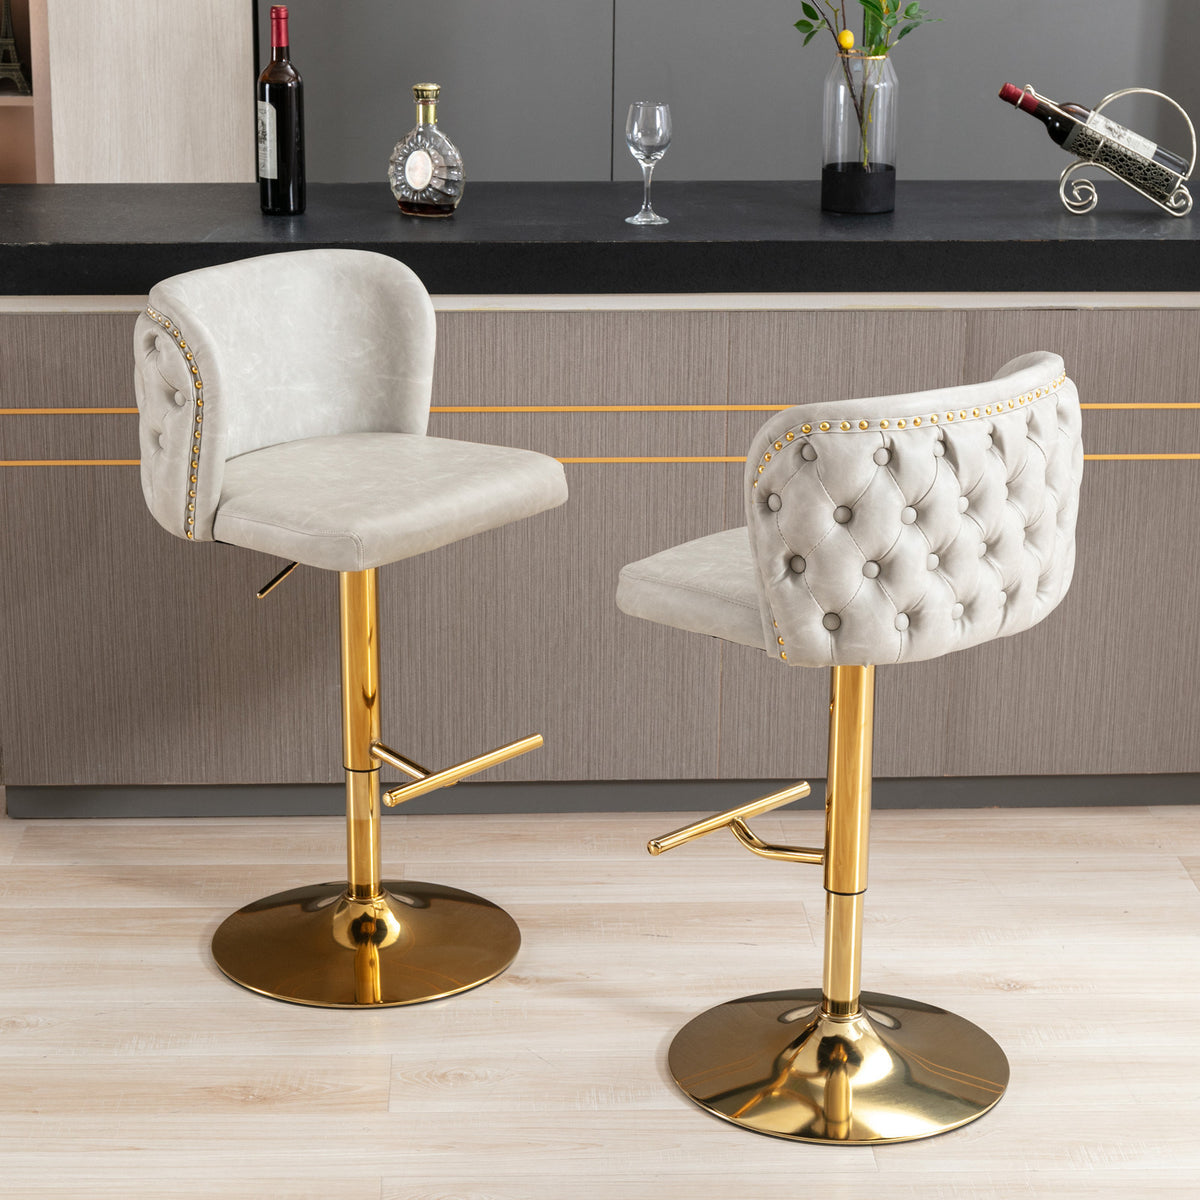 Modern PU Upholstered Swivel Bar Stools With Adjustable Seat Height And tufted Back. (Beige, Set of 2)